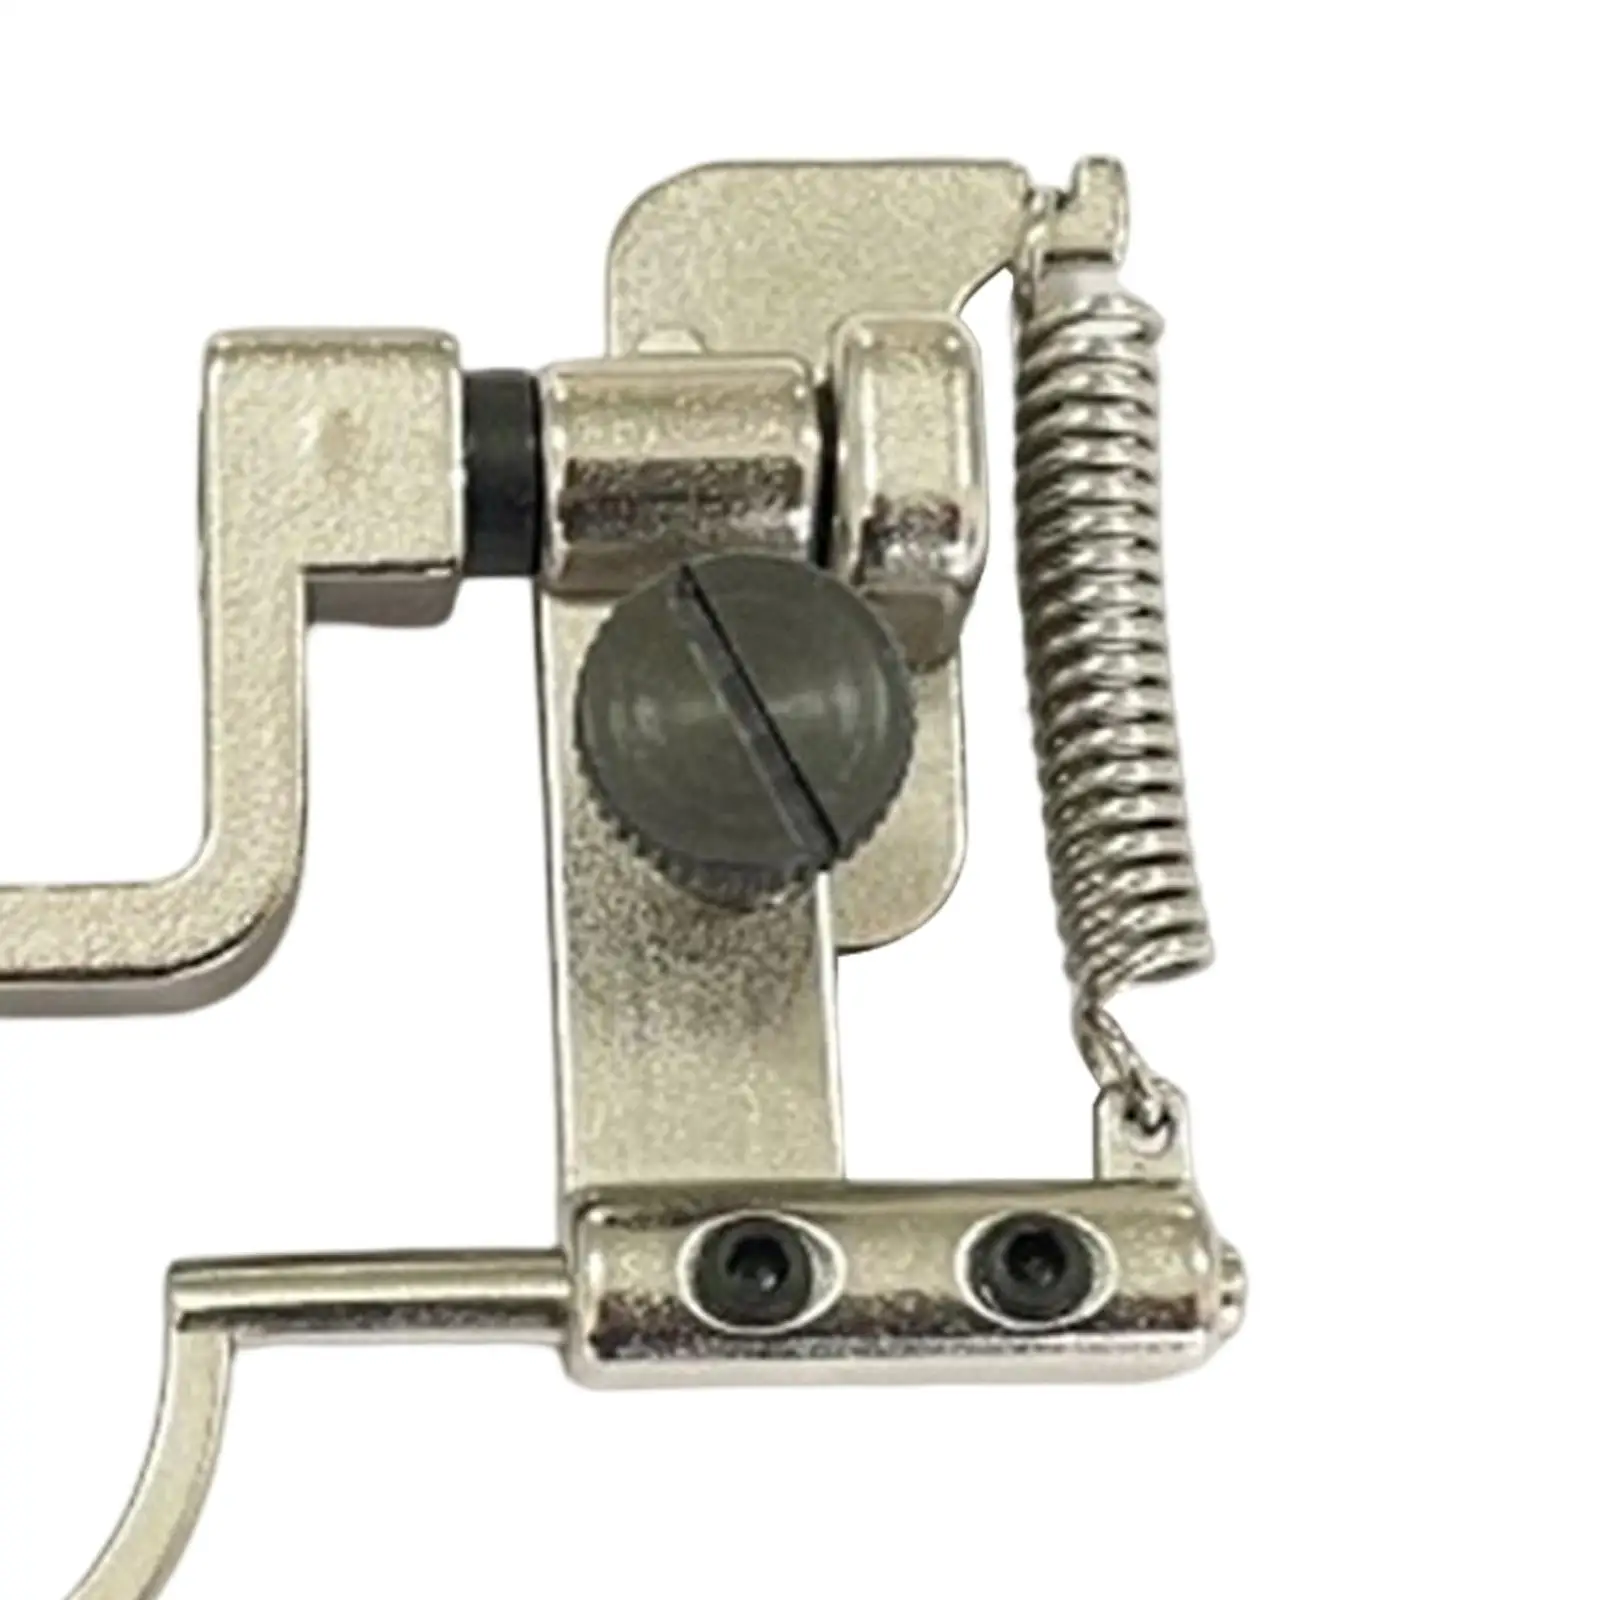 Adjustable Sewing Machine Guide Rail for Beginners - Enhance Your Sewing Experience!